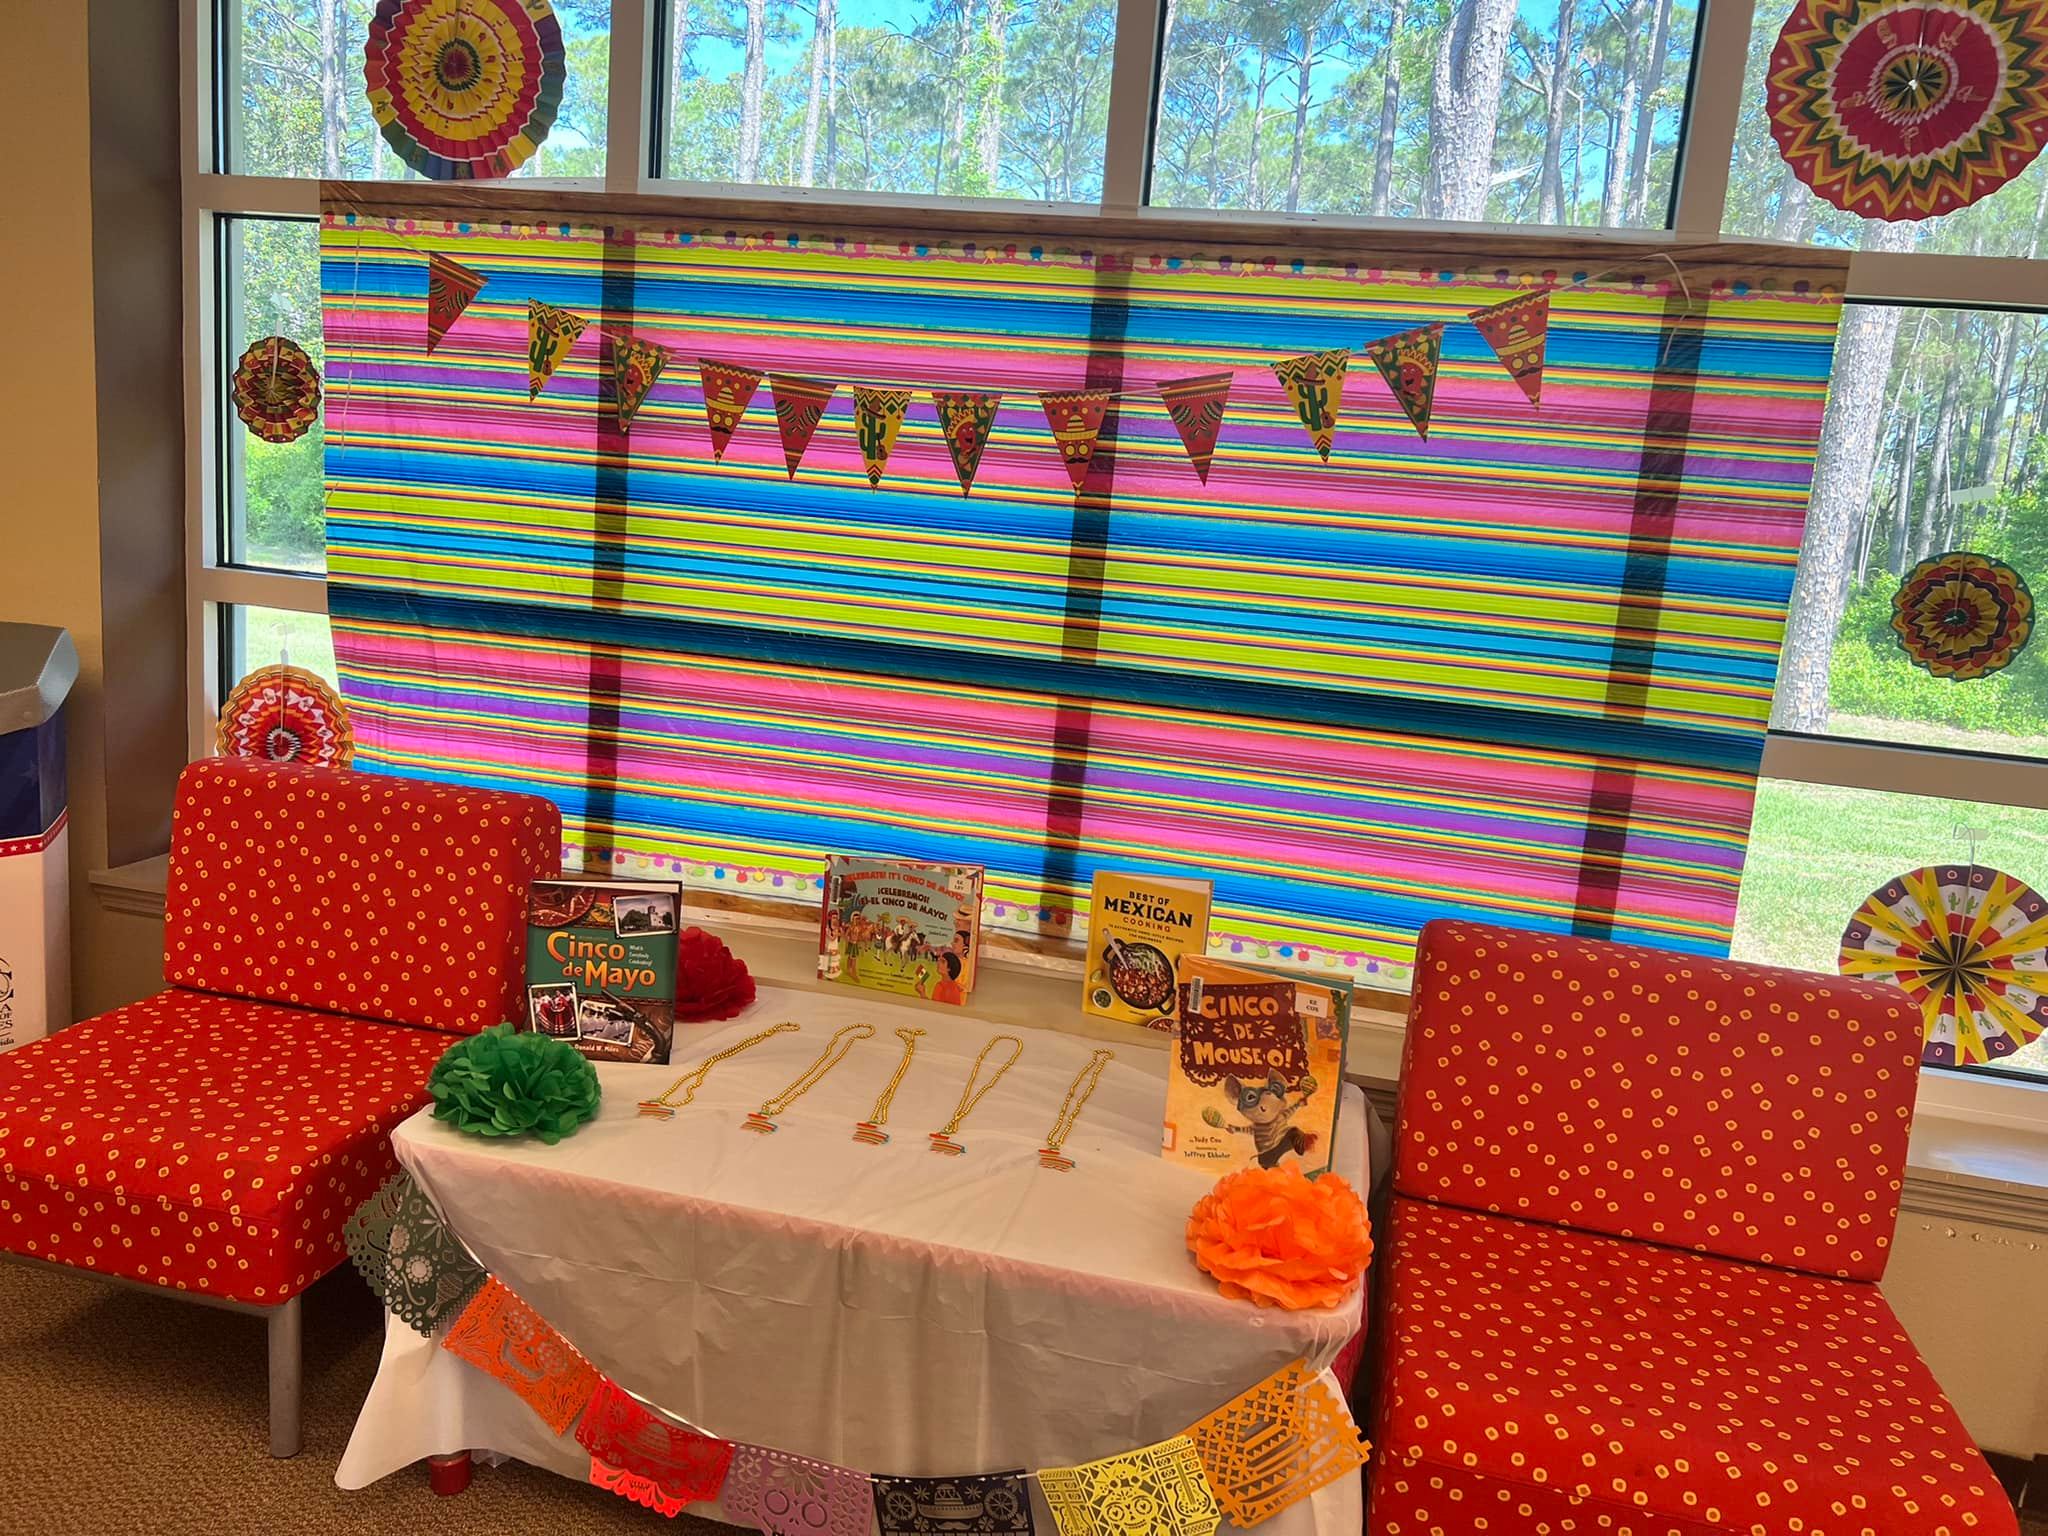 Cinco de Mayo Celebration at Eastpoint Library